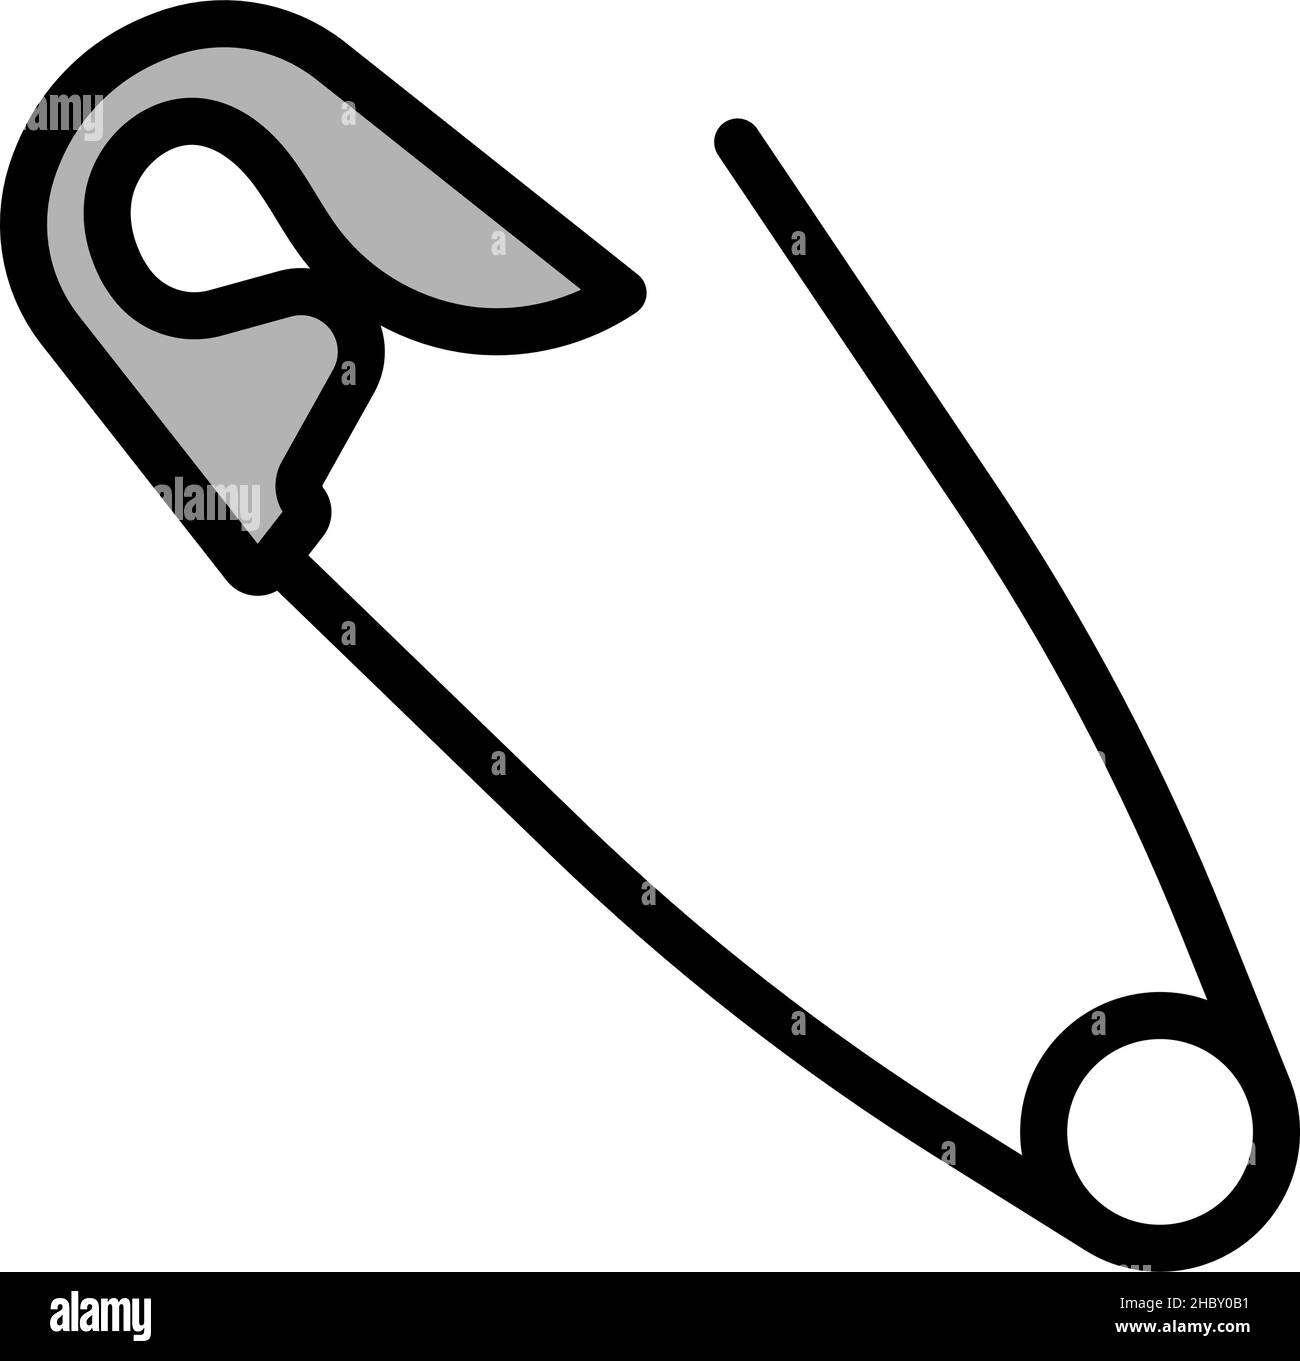 https://c8.alamy.com/comp/2HBY0B1/tailor-safety-pin-icon-editable-bold-outline-with-color-fill-design-vector-illustration-2HBY0B1.jpg